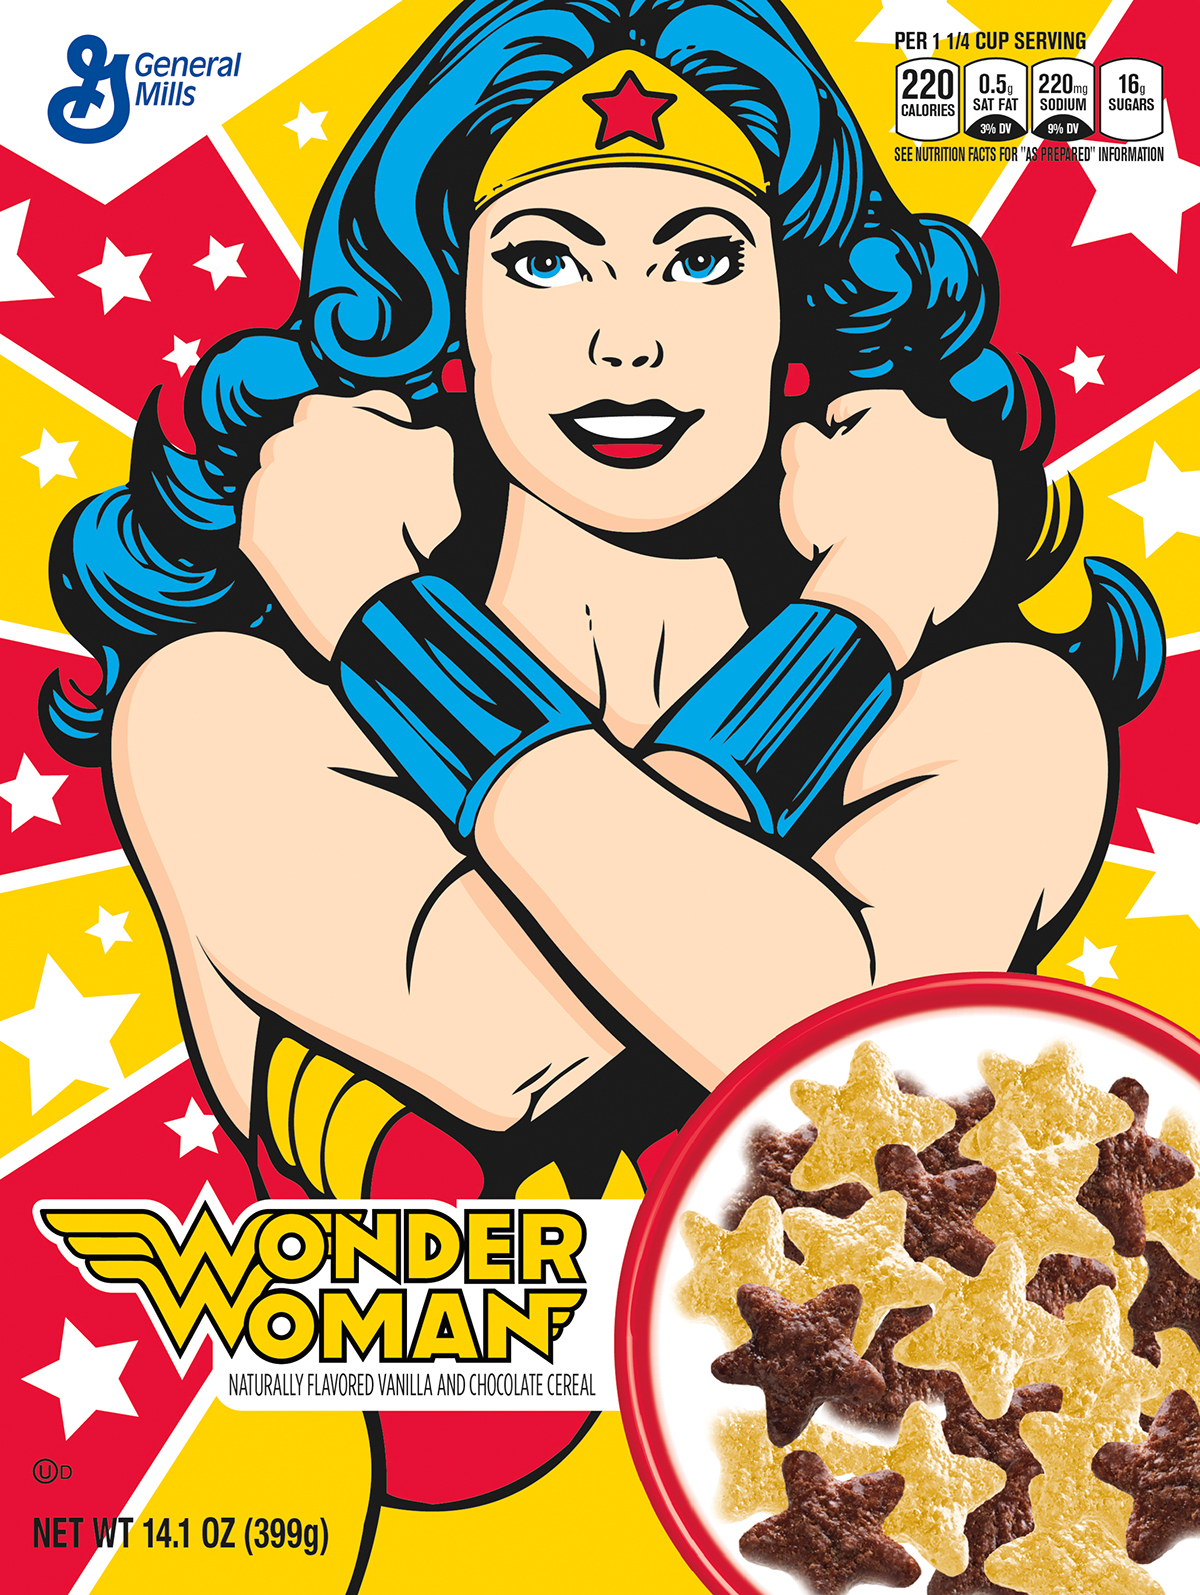 graphic design  Packaging wonder woman hello kitty Muppets TMNT Ghostbusters mario Cereal Food 